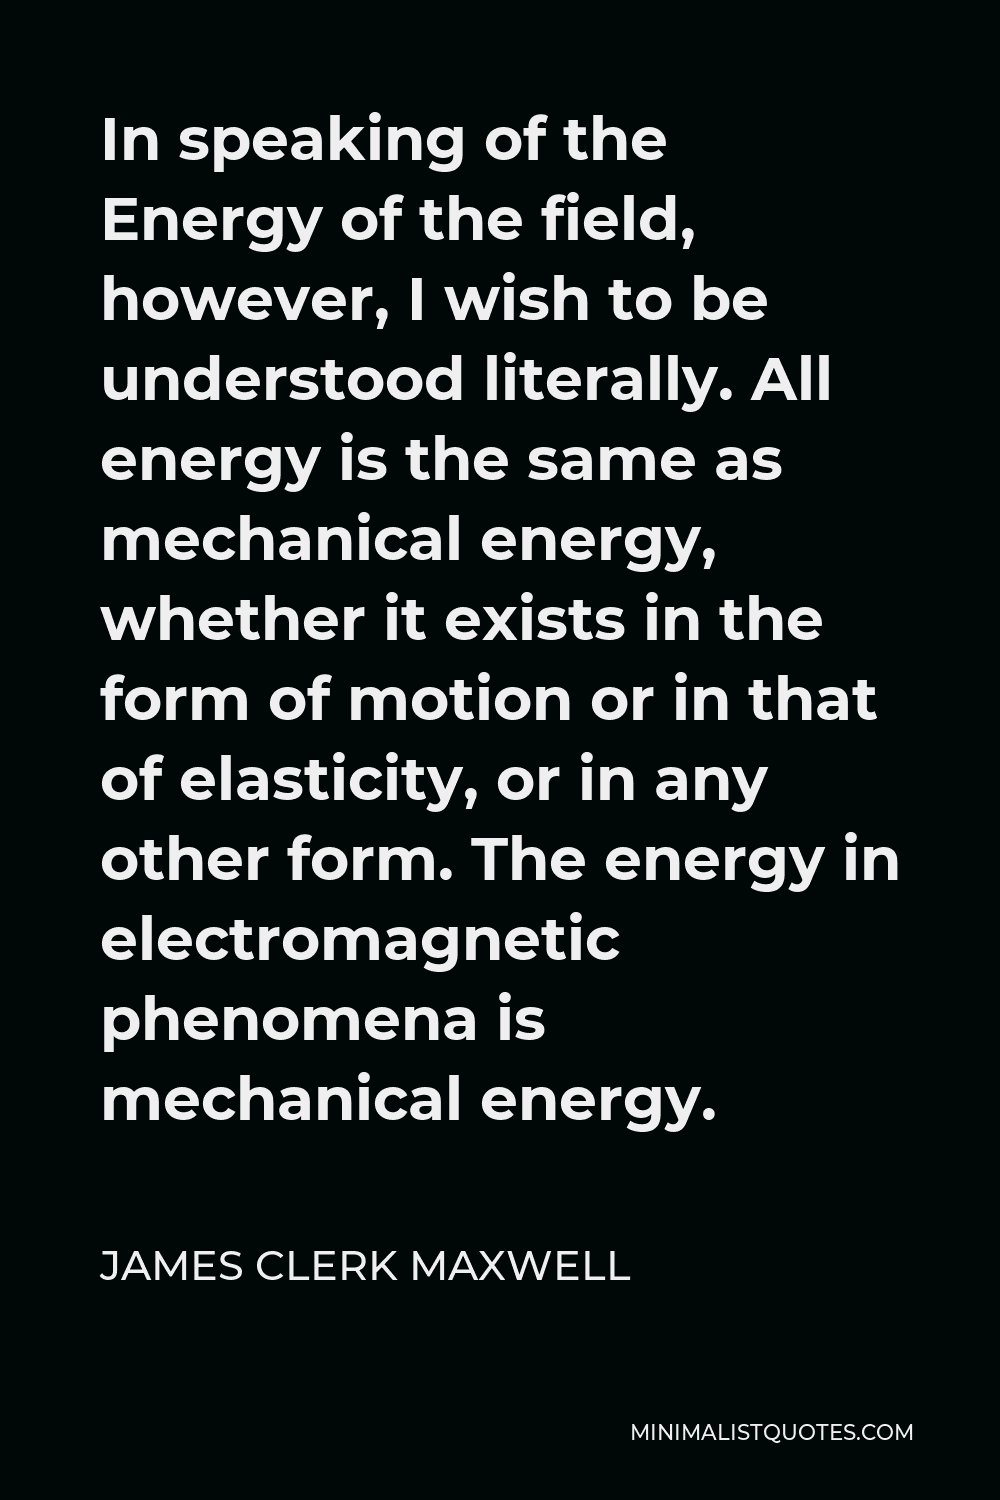 James Clerk Maxwell Quote - In speaking of the Energy of the field, however, I wish to be understood literally. All energy is the same as mechanical energy, whether it exists in the form of motion or in that of elasticity, or in any other form. The energy in electromagnetic phenomena is mechanical energy.